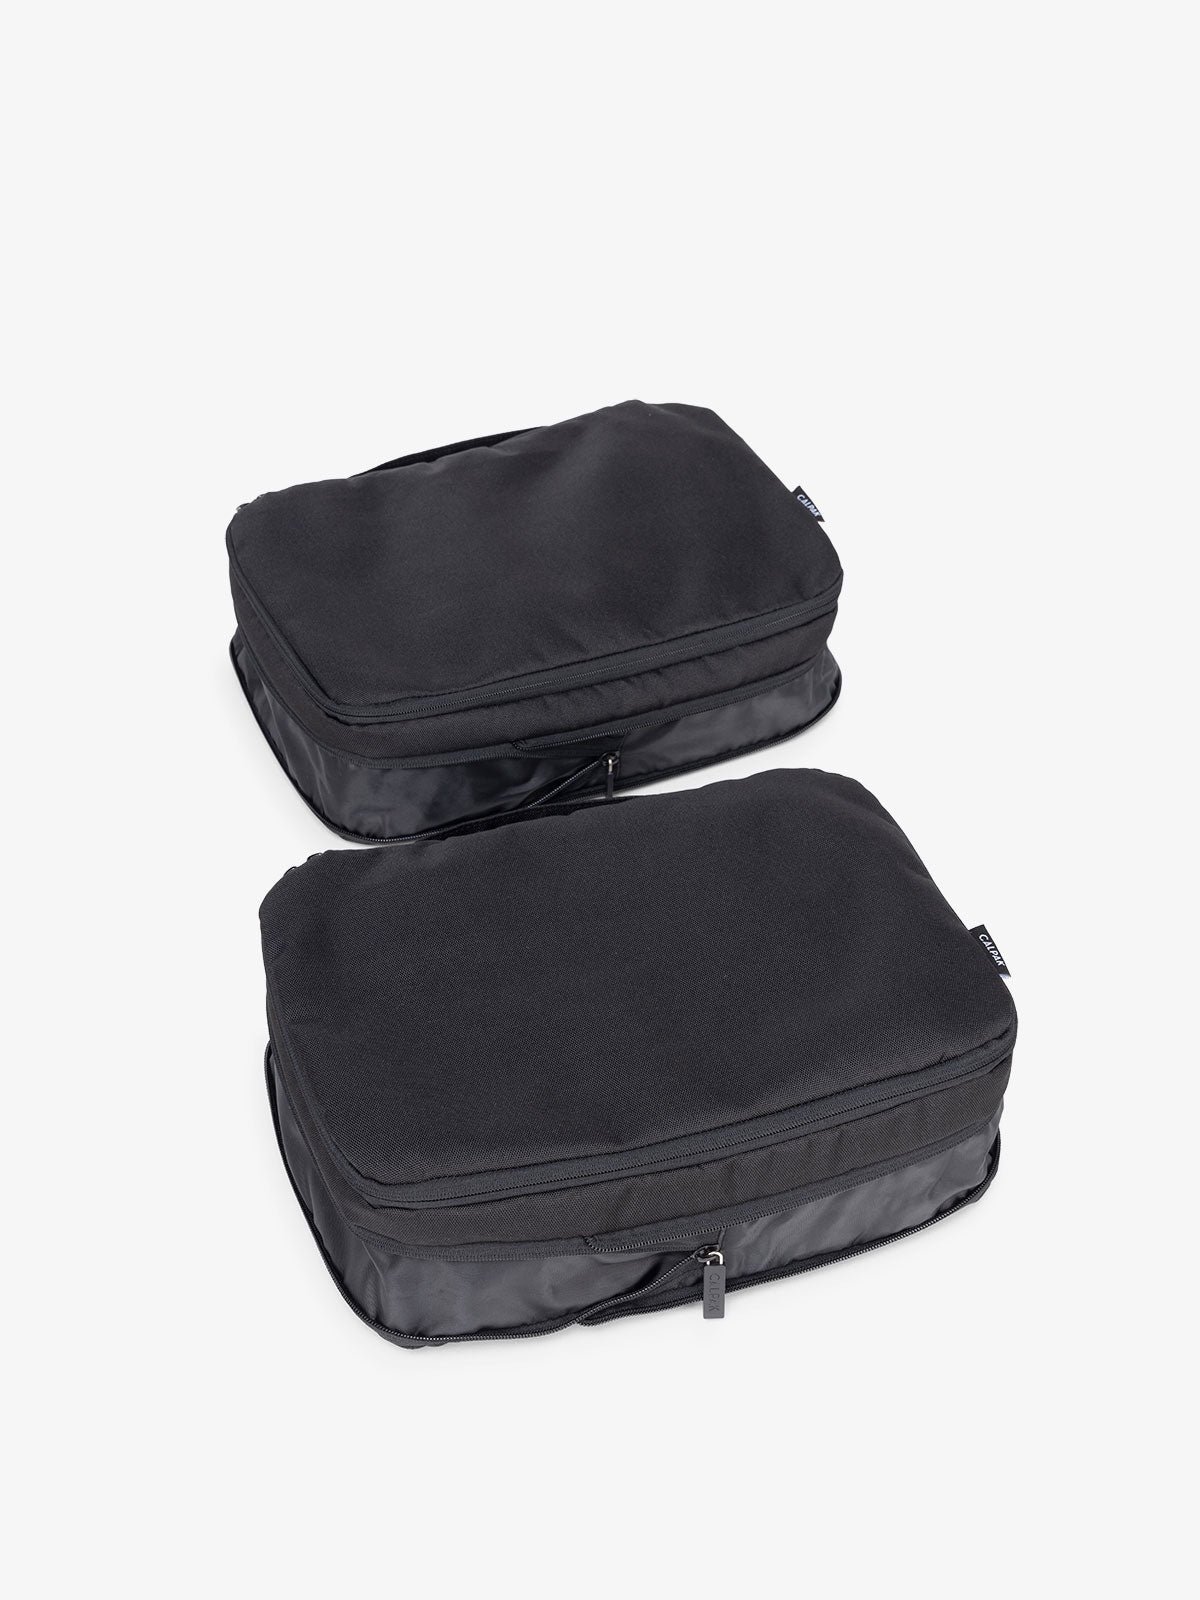 Compression Packing Cubes & Bags For Travel